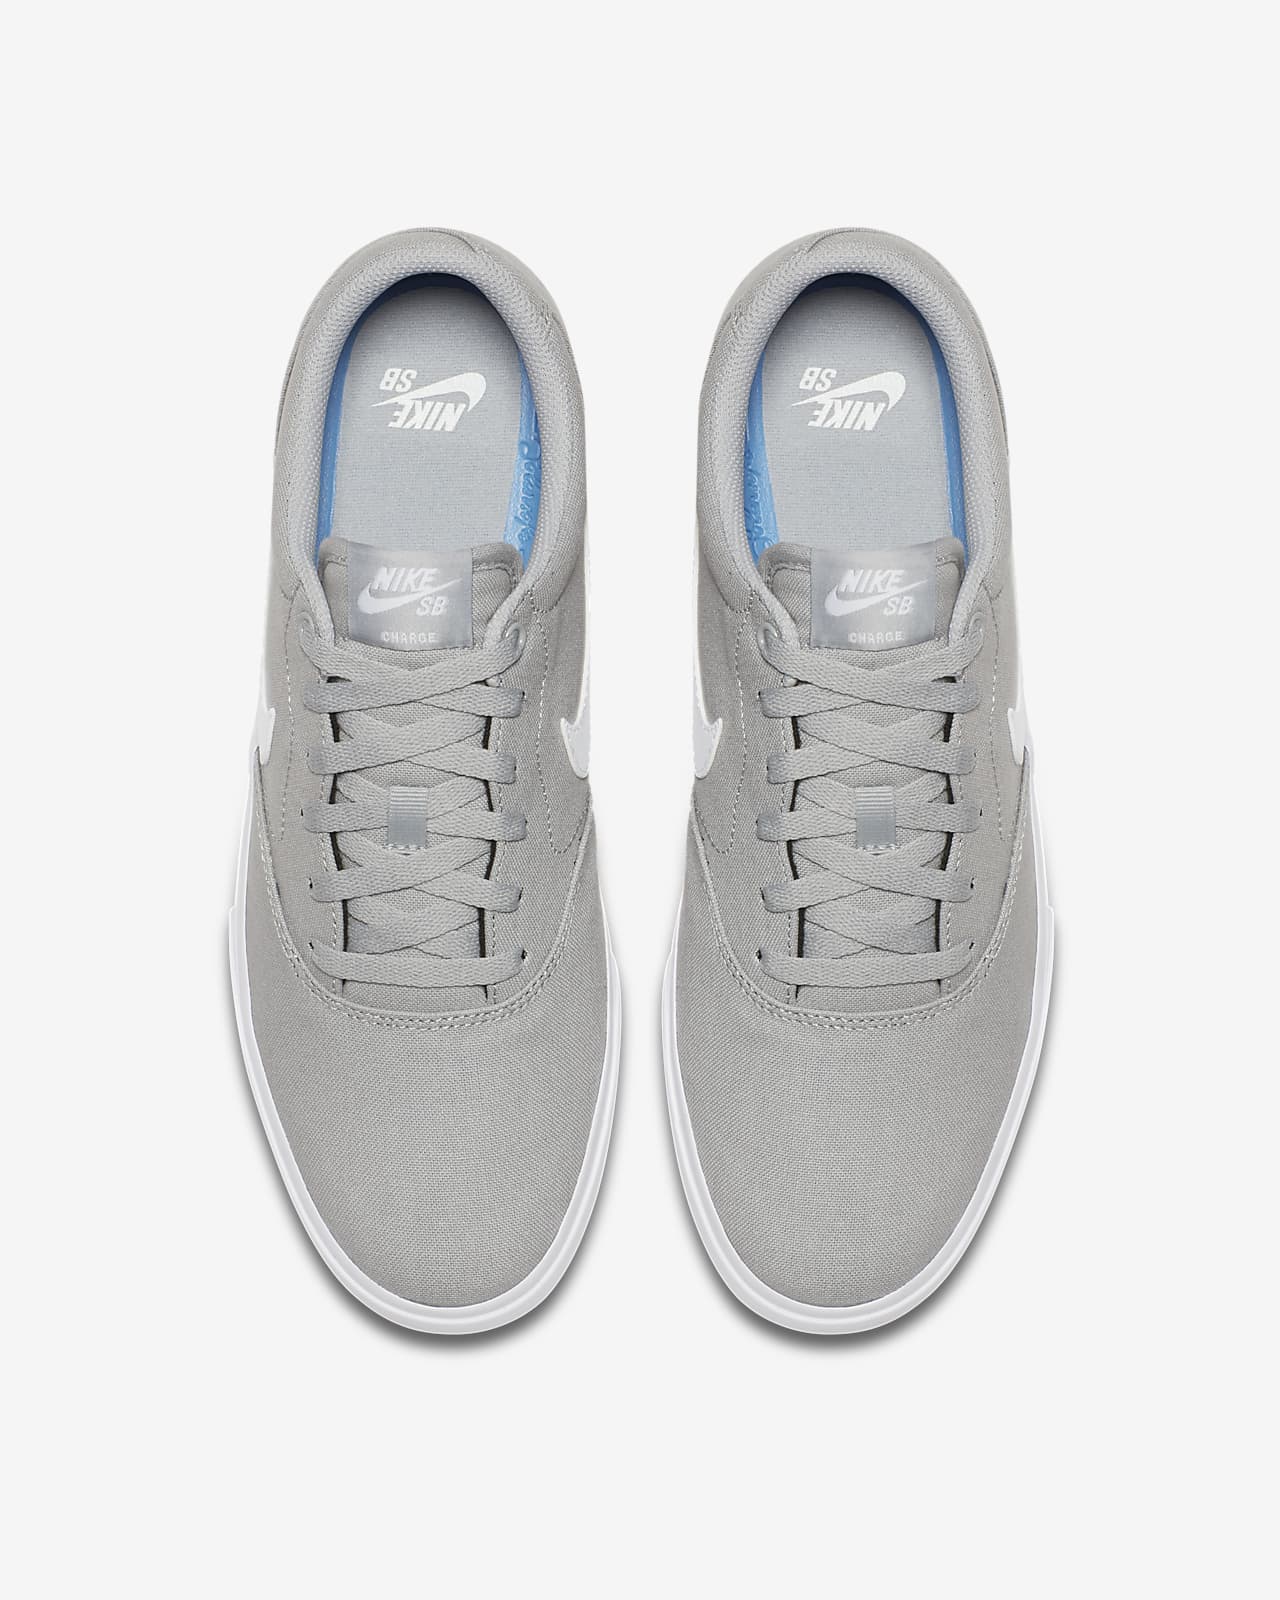 nike sb charges